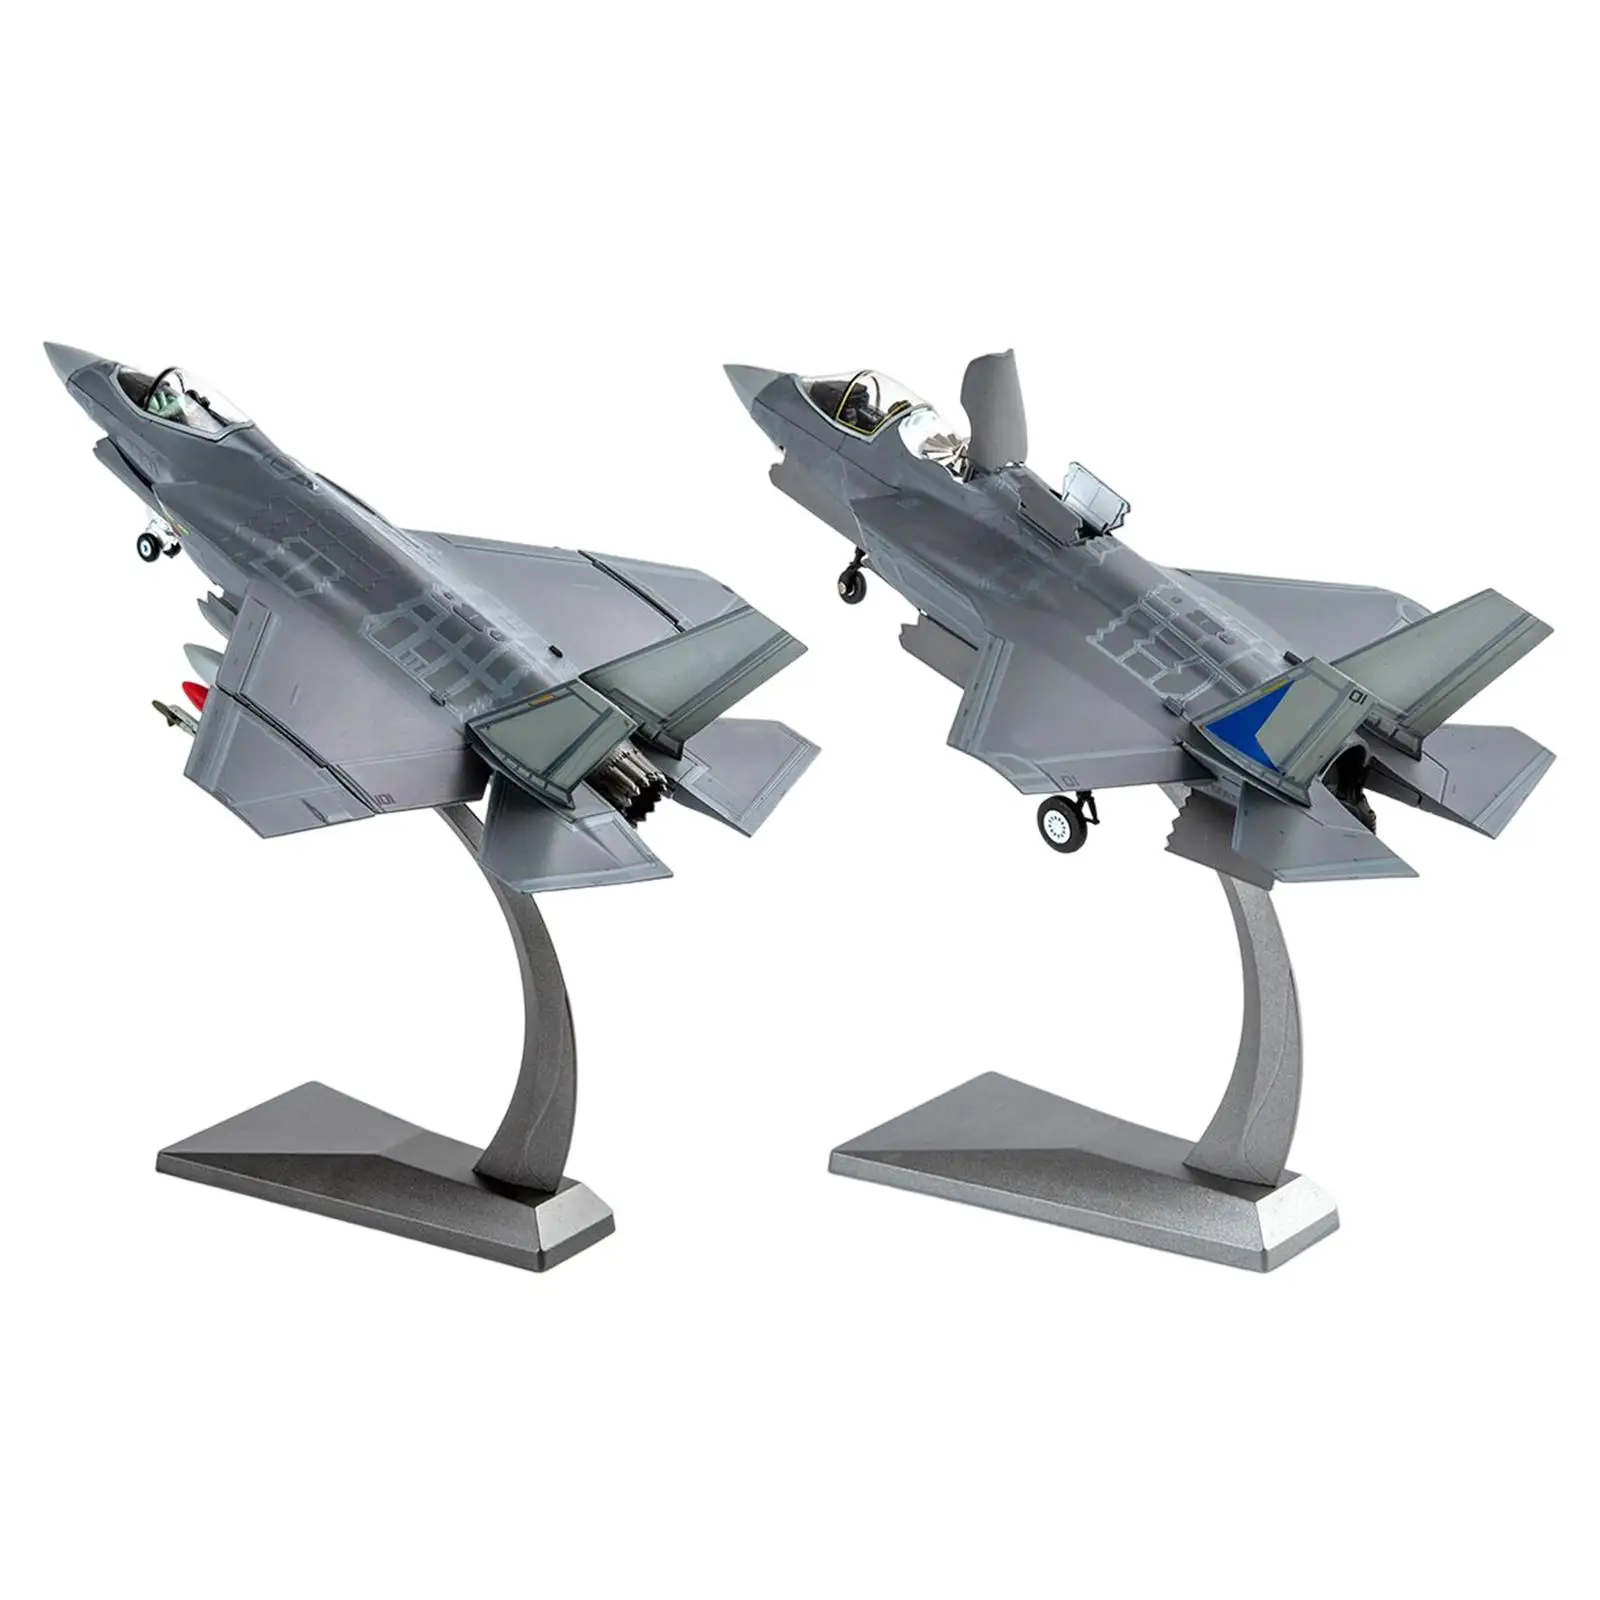 

1/72 Aircraft Model Souvenir Simulated with Display Stand, Tabletop Decor, Diecast Model for Home Countertop Cabinet